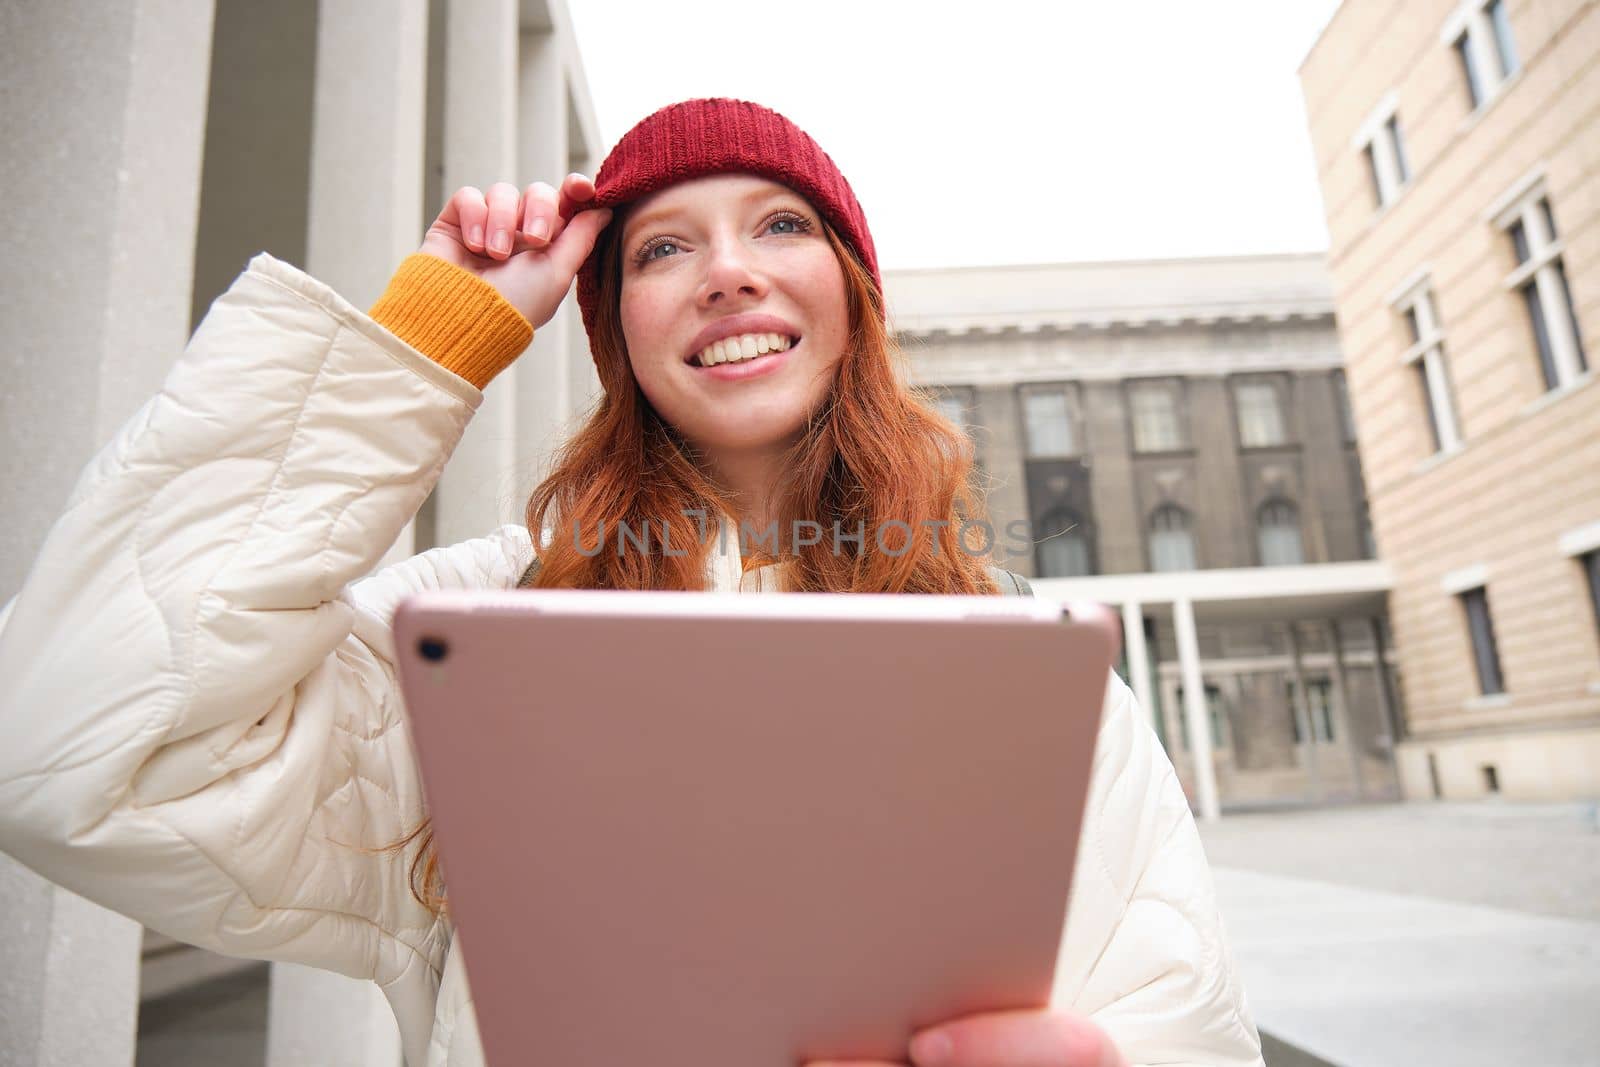 Happy redhead girl in red hat, walks around city with digital tablet, connects to public internet wifi and looks for route, looks at map on her gadget.